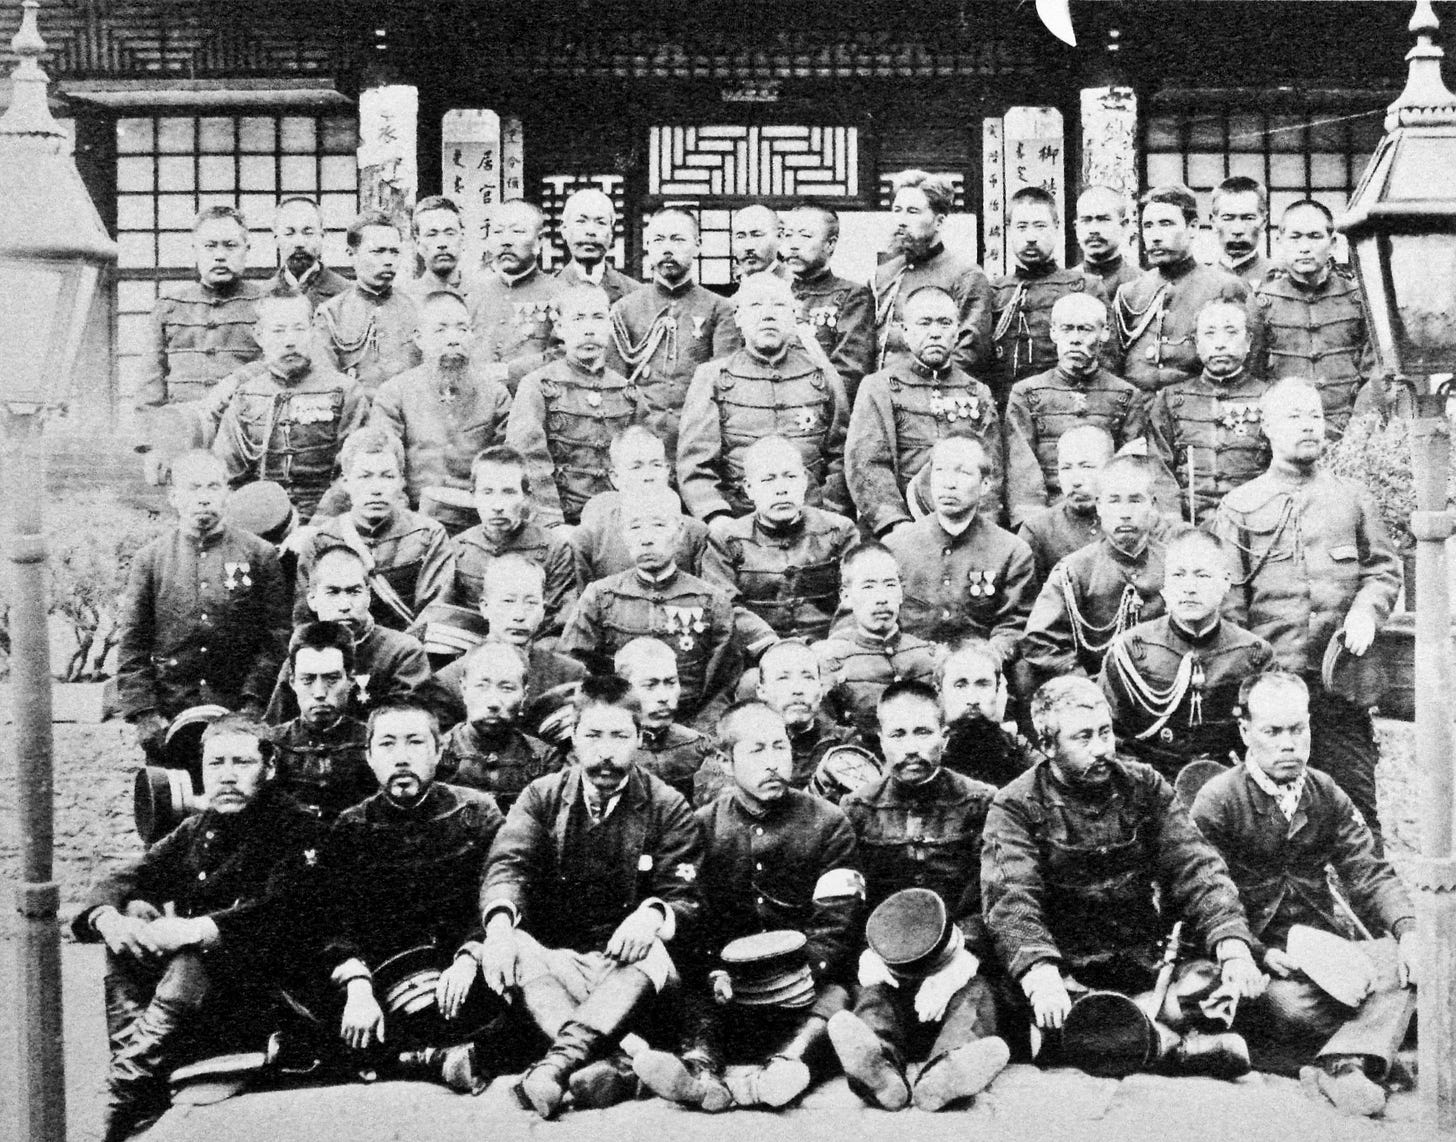 File:Japanese soldiers of the Sino Japanese War 1895.jpg - Wikimedia Commons